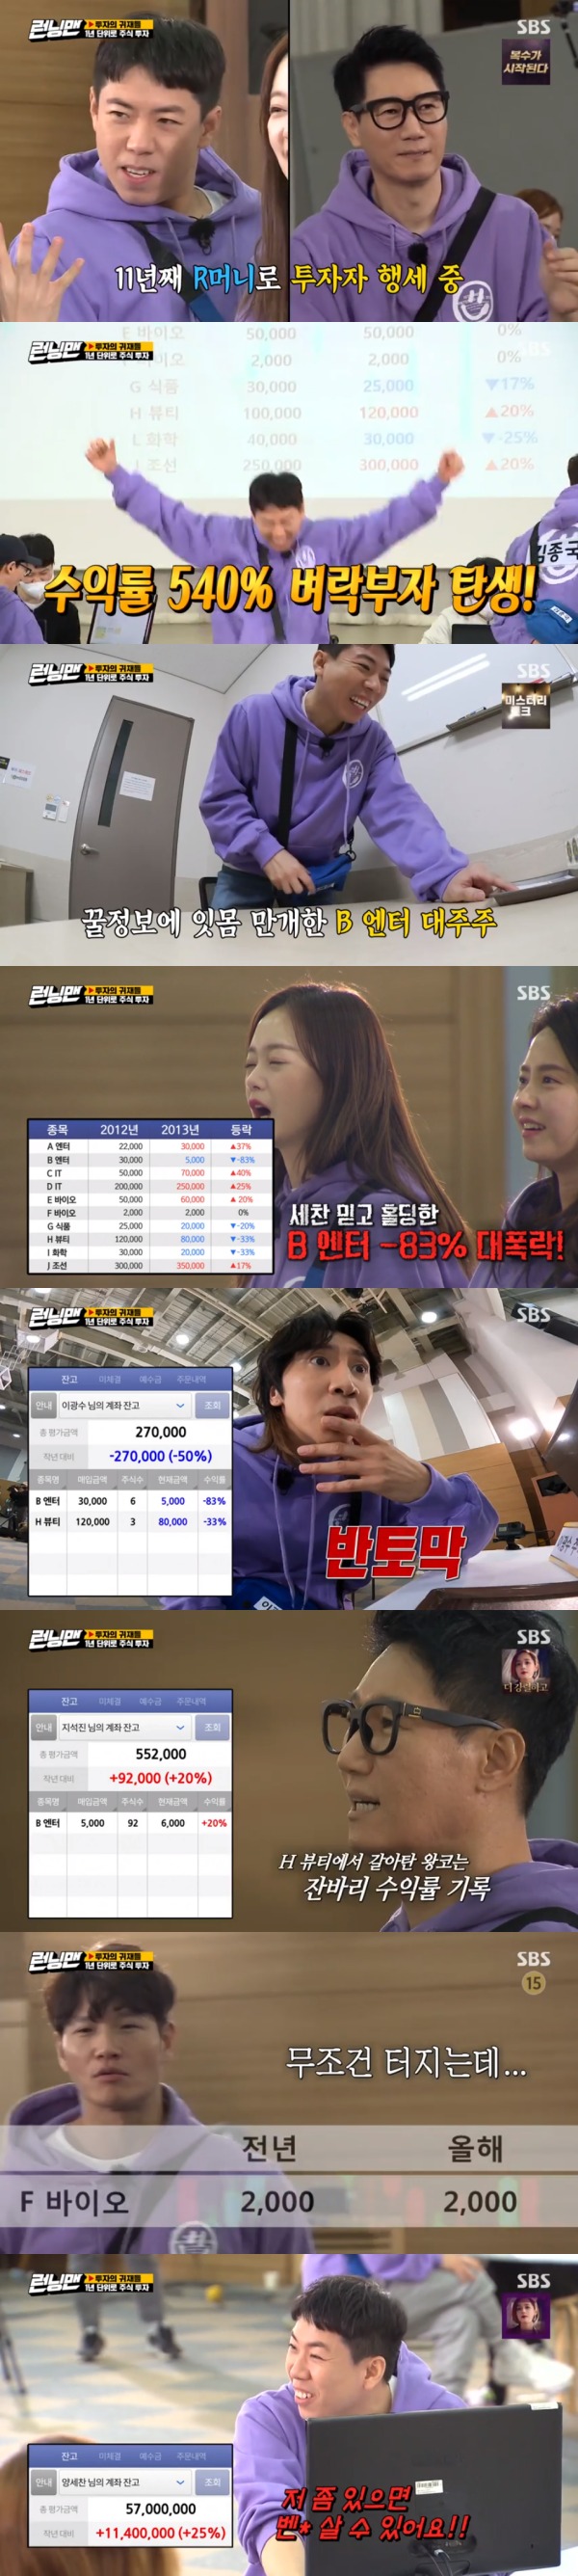 Seoul) = Yang Se-chan has demonstrated extraordinary talent in stocks.The first running investment contest was held on SBS Running Man broadcast on the 21st.All of them will receive 500,000 won in personal capital running money. They will be punished for the first and second prizes and the last one.Each stock is an adaptation of past stock market graphs and issues from 2011 to 2020, and the actual 20 minutes are the same as a year of stock investment.Members began to revive Memory about what happened in 2011, even whispering so much that viewers couldnt hear it.Lee Kwang-soo asked Ji Suk-jin from the basics of what Vaio is and what IT is.Yoo Jae-Suk used Memory at the time to invest in Beauty, Chemistry and Foods; Lee Kwang-soo overheard and followed the investment of Yoo Jae-Suk.The stock-buying Jeon So-min went to buy the information: Vaio and Beautys first-stage information; Jeon So-min believed it was a boon and bought shares in both stocks.Ji Suk-jin bought Beauty Phase 2 information: Ji Suk-jin, who got direct information called stock price rise, was all in for Beauty.Then shed false information to the troubled Yang Se-chan, Invest in Andreu Buenafuente.Ji Suk-jins information, Yang Se-chan, bought a large number of Andreu Buenafuente shares.Ji Suk-jin also spilled false information on Jeon So-min, who overheard Yoo Jae-Suk also bought Andreu Buenafuente shares with the remaining money.Twenty minutes later, the stock market opened in 2012; B Andreu Buenafuente, Beauty and shipbuilding stocks rose.Ji Suk-jin was a false information leak, but when he heard it, Yang Se-chan, who invested in Andreu Buenafuente, became a thunderstorm rich; the yield was as high as 540%.Jeon So-min also made a profit with B Andreu Buenafuente and Beauty; Song Ji-hyo was cut a third.I think its going to be fun actually, its a big deal, said Jeon So-min, who said: It hurts my stomach, when I see a man doing well.I also made a profit, but I feel like I lost a few hundred pros. Yang Se-chan, the major shareholder of B Andreu Buenafuente, bought B Andreu Buenafuentes second-tier information for 2012.Shares in B Andreu Buenafuente were due to fall.Yang Se-chan, who gained important information, sold B Andreu Buenafuente and gave fake information to Jeon So-min and Lee Kwang-soo, who hold B Andreu Buenafuente, to keep B Andreu Buenafuente.Yoo Jae-Suk looked at the joyful Jeon So-min and said, I am worried that I will be mistaken for being first in mock investment and open a real stock account and fail.I just shot it, I got the information, but I dont know what it is, Song Ji-hyo said.The results of the investment were released in 2012; Yang Se-chan, who sold B Andreu Buenafuente and invested in IT, also posted a high return.Jeon So-min and Lee Kwang-soo, who were deceived by Yang Se-chan and had Andreu Buenafuente, suffered a great loss.Lee Kwang-soo lost 50 percent of its principal in two years, when Lee Kwang-soo shouted, Give me my money, I dont care about stocks, Im going home.Song Ji-hyo, who invested in IT in 2011 and lost a lot of IT, did not make any profit even in the changed stocks.Lee Kwang-soo followed Yoo Jae-Suk and asked, What happened to chemistry in 2013?Ji Suk-jin recited the flow of the past stock market, but he laughed when it was revealed that he did not make a profit.The year 2014 began: The upper limit of 2013 was H Beauty. Yang Se-chan has invested for three consecutive years and has been called the principal of 500,000 won to 7 million won.Lee Kwang-soo, who had been selling while having H Beauty, was devastated.The results of the interim counts were Yang Se-chan, Yoo Jae-Suk and Kim Jong-kook.Ji Suk-jin, Song Ji-hyo and Lee Kwang-soo were 6–8th; Ji Suk-jin said: Its unfair.H Beauty had two years and then surged as soon as it was sold, said Lee Kwang-soo, who blamed Ji Suk-jin.When the stock market opened again, people gathered to hear Yang Se-chans opinion; Kim Jong-kook said Vaio would rise in 2015.Upon hearing this, Yang Se-chan purchased the F Vaio Phase 2 information; as Kim Jong-kook said, F Vaio was to rise.With solid information, Yang Se-chan bought F Vaio; Kim Jong-kook had long troubles over F Vaio.Ji Suk-jin advised last-placed Lee Kwang-soo and Song Ji-hyo.Vaio, which Lee Kwang-soo has, said he would keep falling and told him to buy H Beauty.For wandering Lee Kwang-soo, Yang Se-chan recommended E Vaio, not the F Vaio he knew.Lee Kwang-soo, Yoo Jae-Suk bought E Vaio on the faith of Yang Se-chan.Song Ji-hyo, who is losing money in succession, said to himself that he should work hard and earn it.The results were released after the stock market ended in 2015.Lee Kwang-soo, who was in a bad mood with a phenomenal return of 1100% of E Vaio, which Yang Se-chan had leaked as false information, was paralyzed.Lee Kwang-soo posted a big verse to Yang Se-chan; however, Lee Kwang-soo, who later confirmed Yang Se-chans investment list, felt betrayed.Yang Se-chan shouted back, Where did you make a profit?On the other hand, Yang Se-chan succeeded in making profits for five consecutive years and was called 500,000 won for 45 million won.In 2016, G foods bought by Yang Se-chan and Ji Suk-jin rose; while E Vaio, which recorded 1100% revenues last year, fell sharply.Lee Kwang-soo bought the first stage information, but Yang Se-chan bought the second stage information, so the joy was mixed.Song Ji-hyo, who saw the blue light again, spit out a rough word without knowing it. Yoo Jae-Suk said, I thought I was hit too.There should be high-quality information, he apologized to Song Ji-hyo, who made a profit from G food, but was bitter, saying, What do you eat here? Its a real drop.Lee Kwang-soo bought the information but did not understand what it meant and went back to Yoo Jae-Suk.Yoo Jae-Suk interpreted it as a favorable and purchased a large quantity of chemistry; Lee Kwang-soo also followed Yoo Jae-Suk.